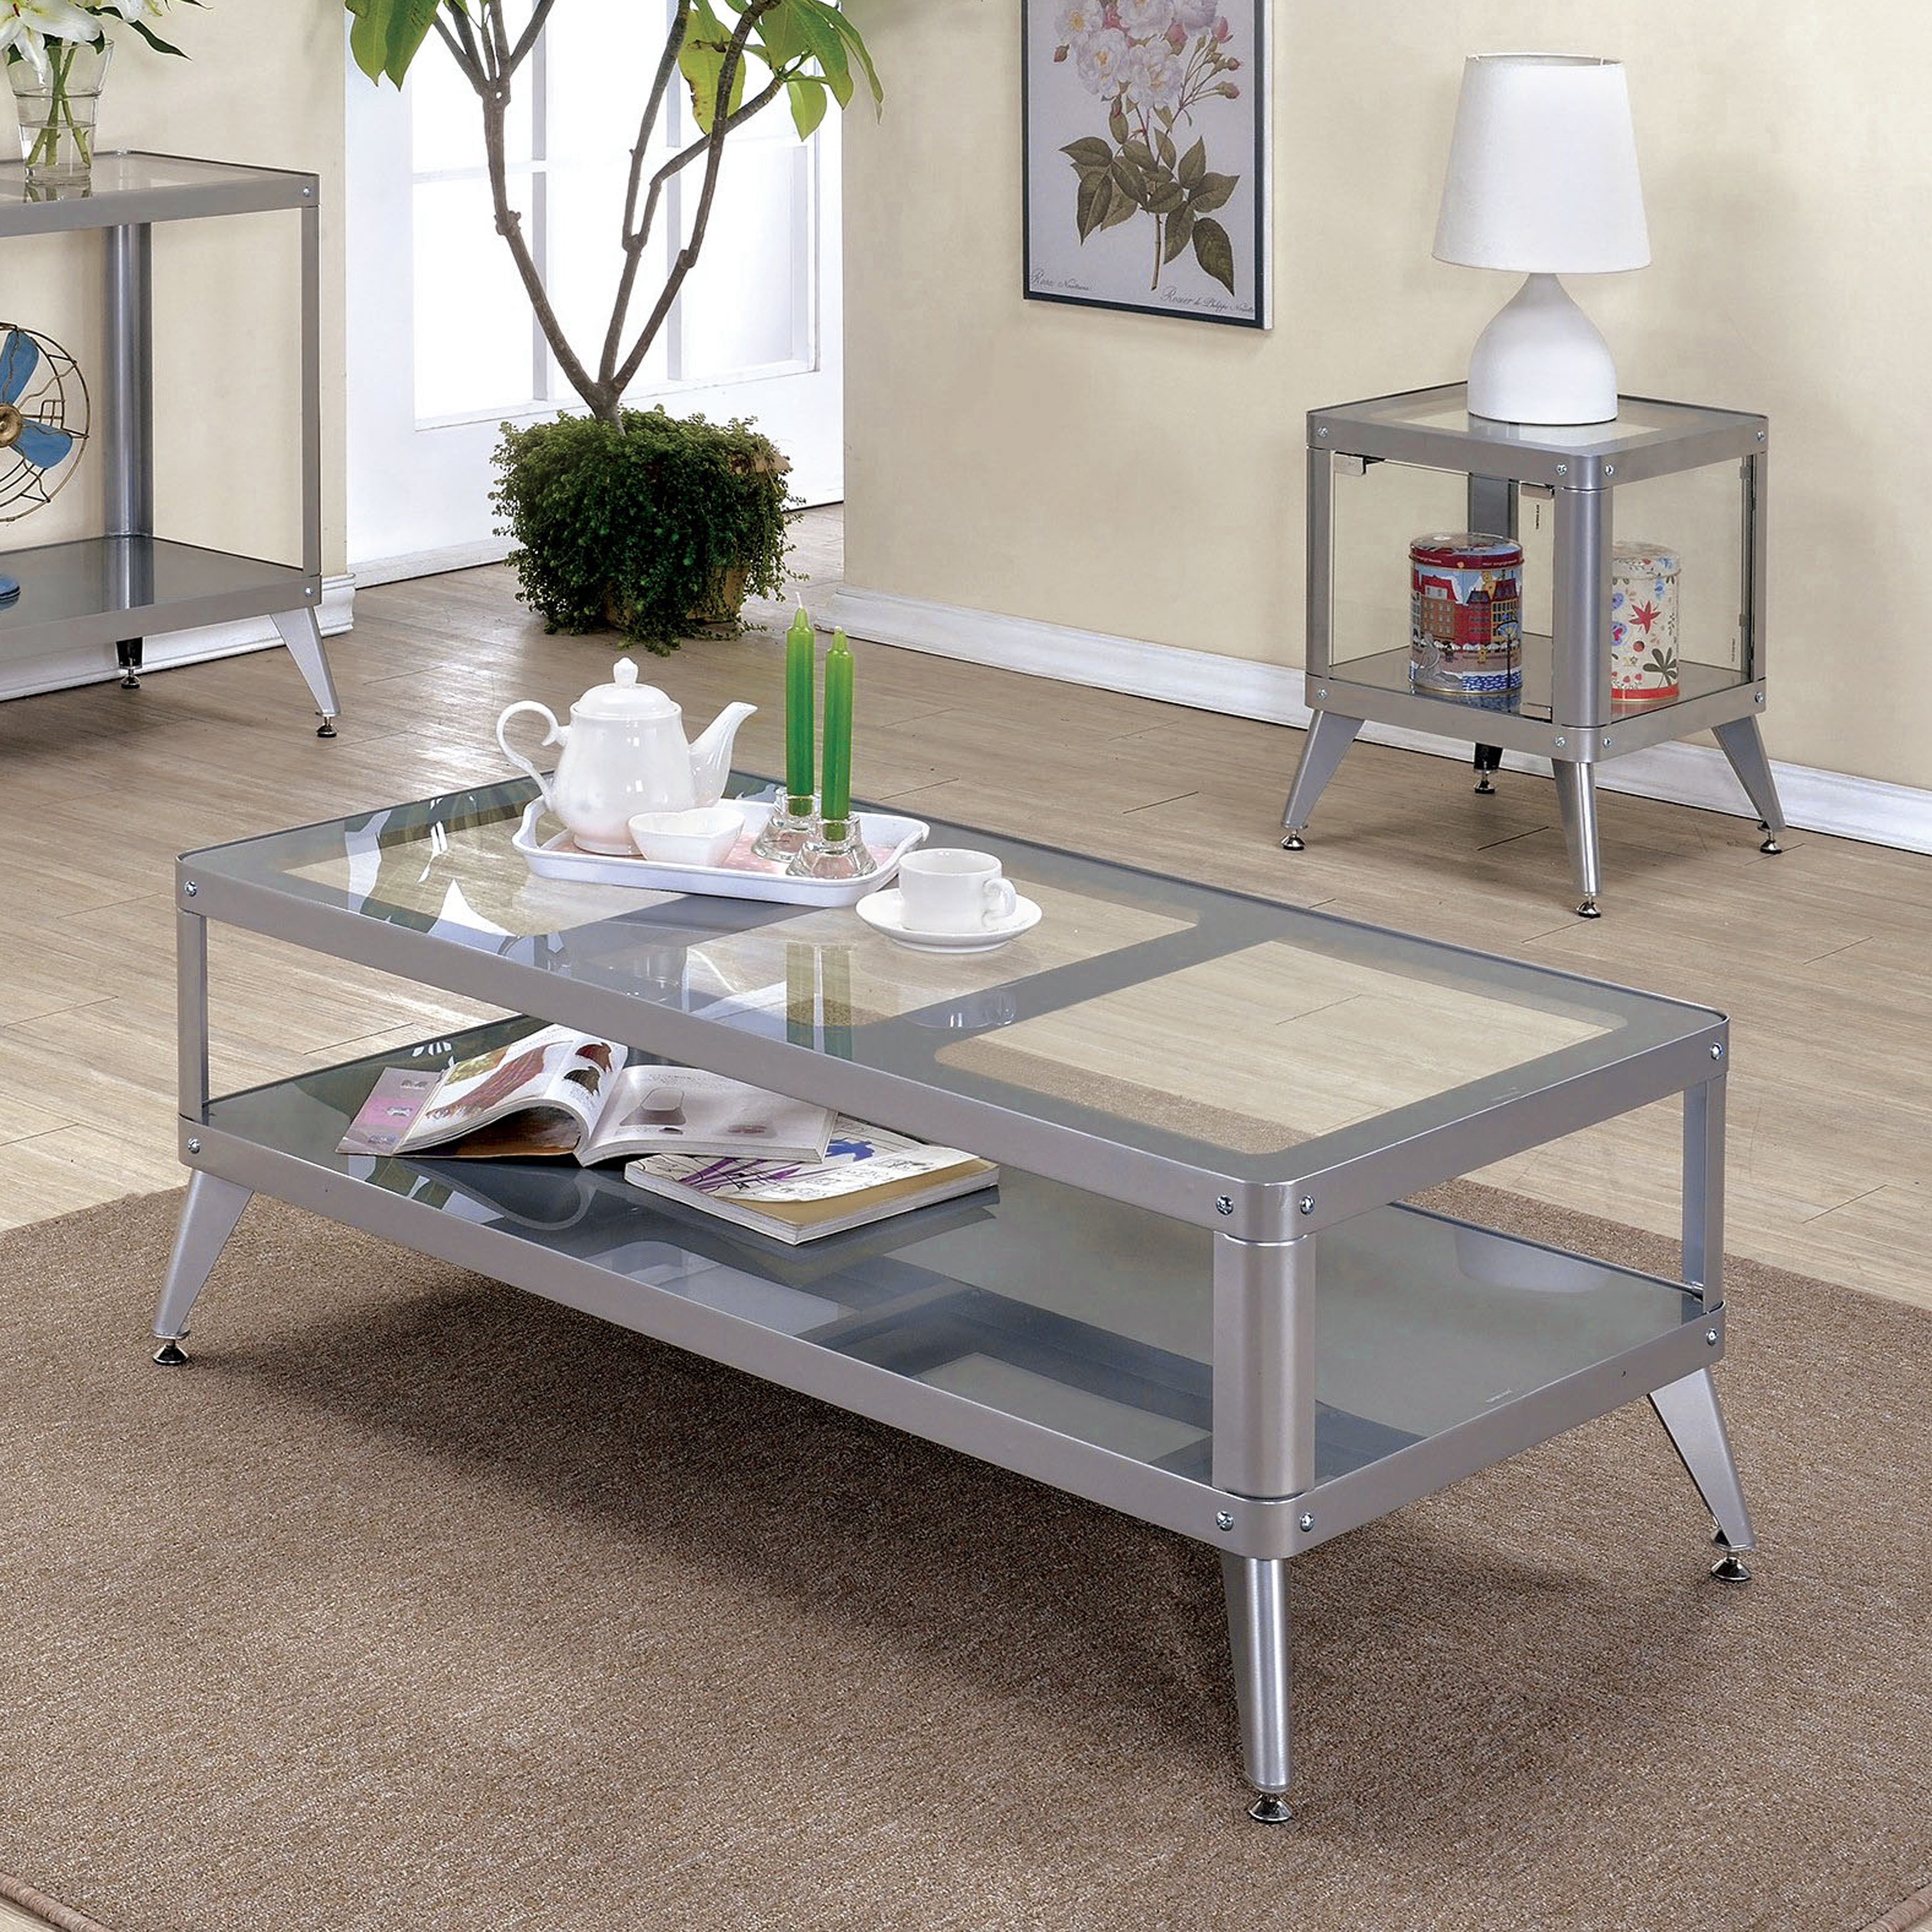 furniture america linden modern piece glass top metal accent table set room essentials patio free shipping today small end with shelves bar height beach bedroom decor iron